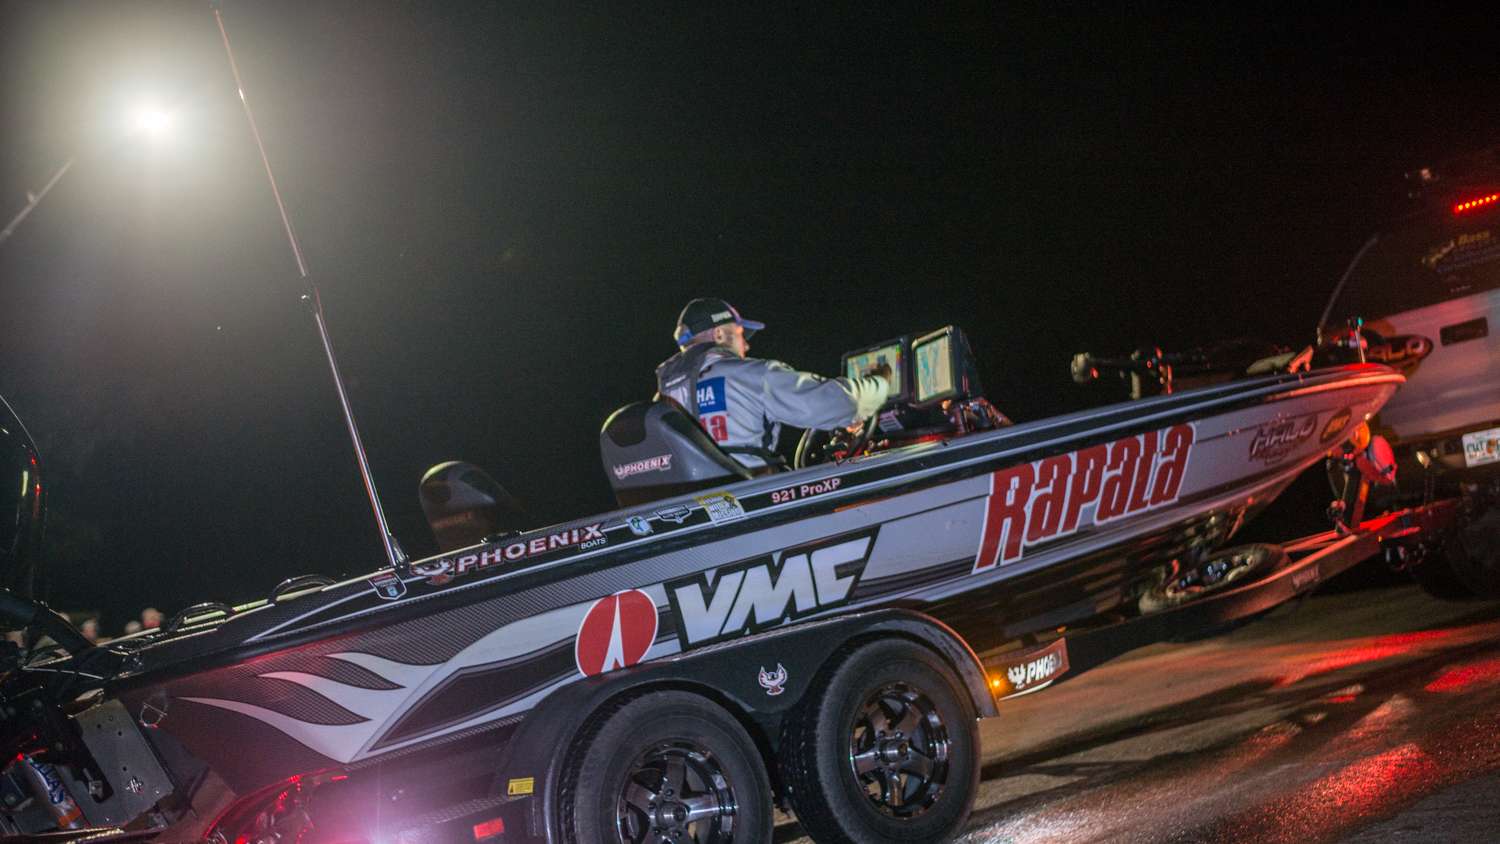 With storms looming on the horizon the Bassmaster Elite Series angler launch their rigs for Day 2 on the Mississippi River. Randall Tharp, in 10th place after Day 1, will be looking to move up the standings to get him in a better position going into the weekend. 